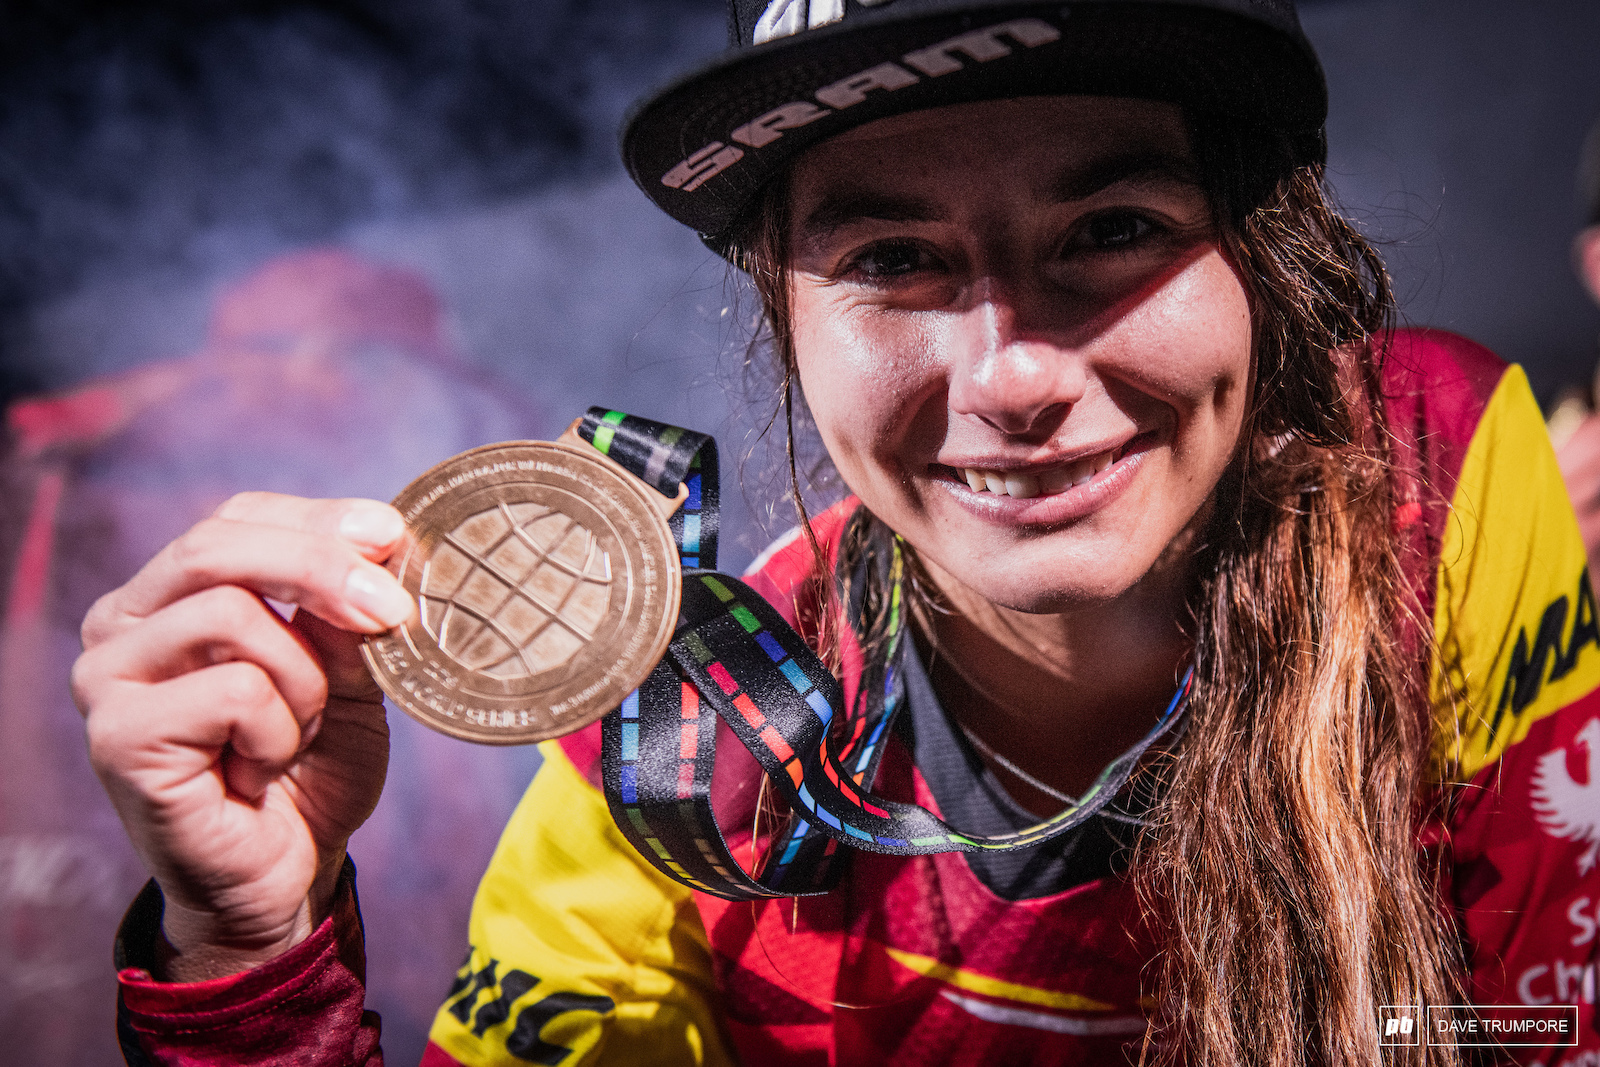 Isabeau Courdurier had the perfect golden season winning all 8 rounds and the overall title